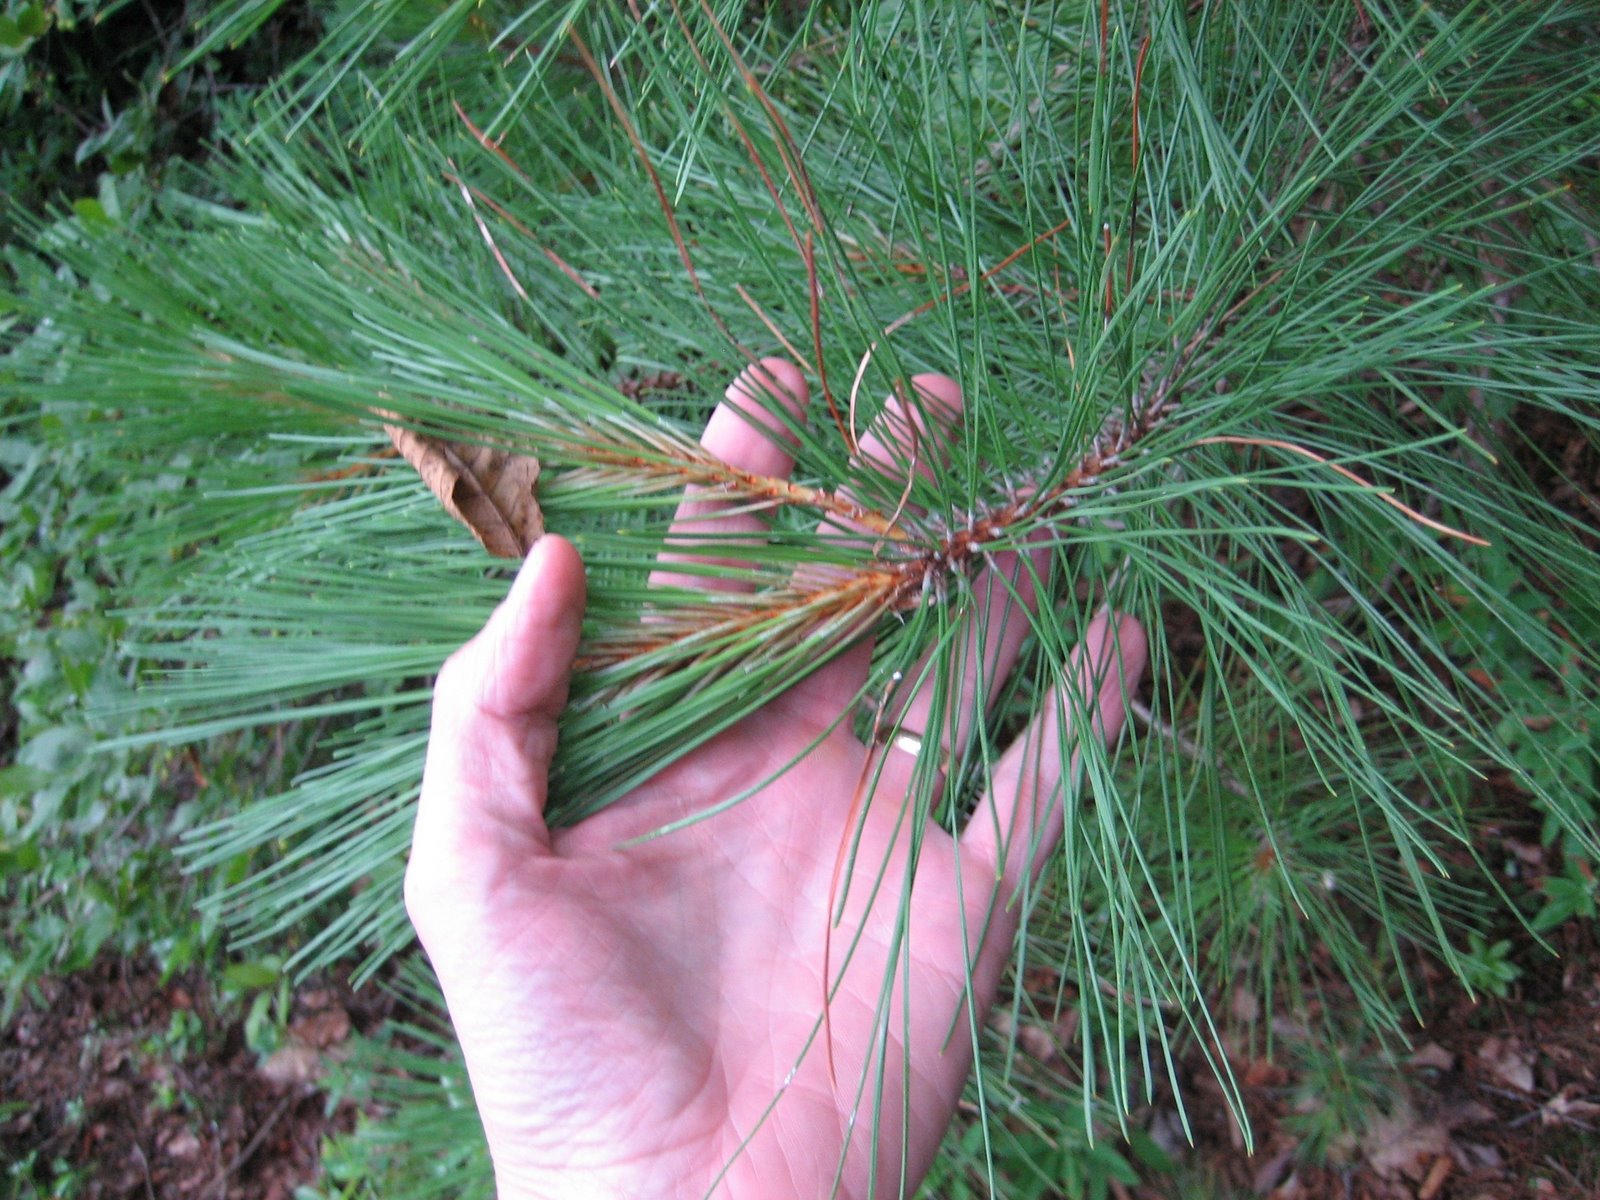 [Red+Pine+in+Hand.jpg]